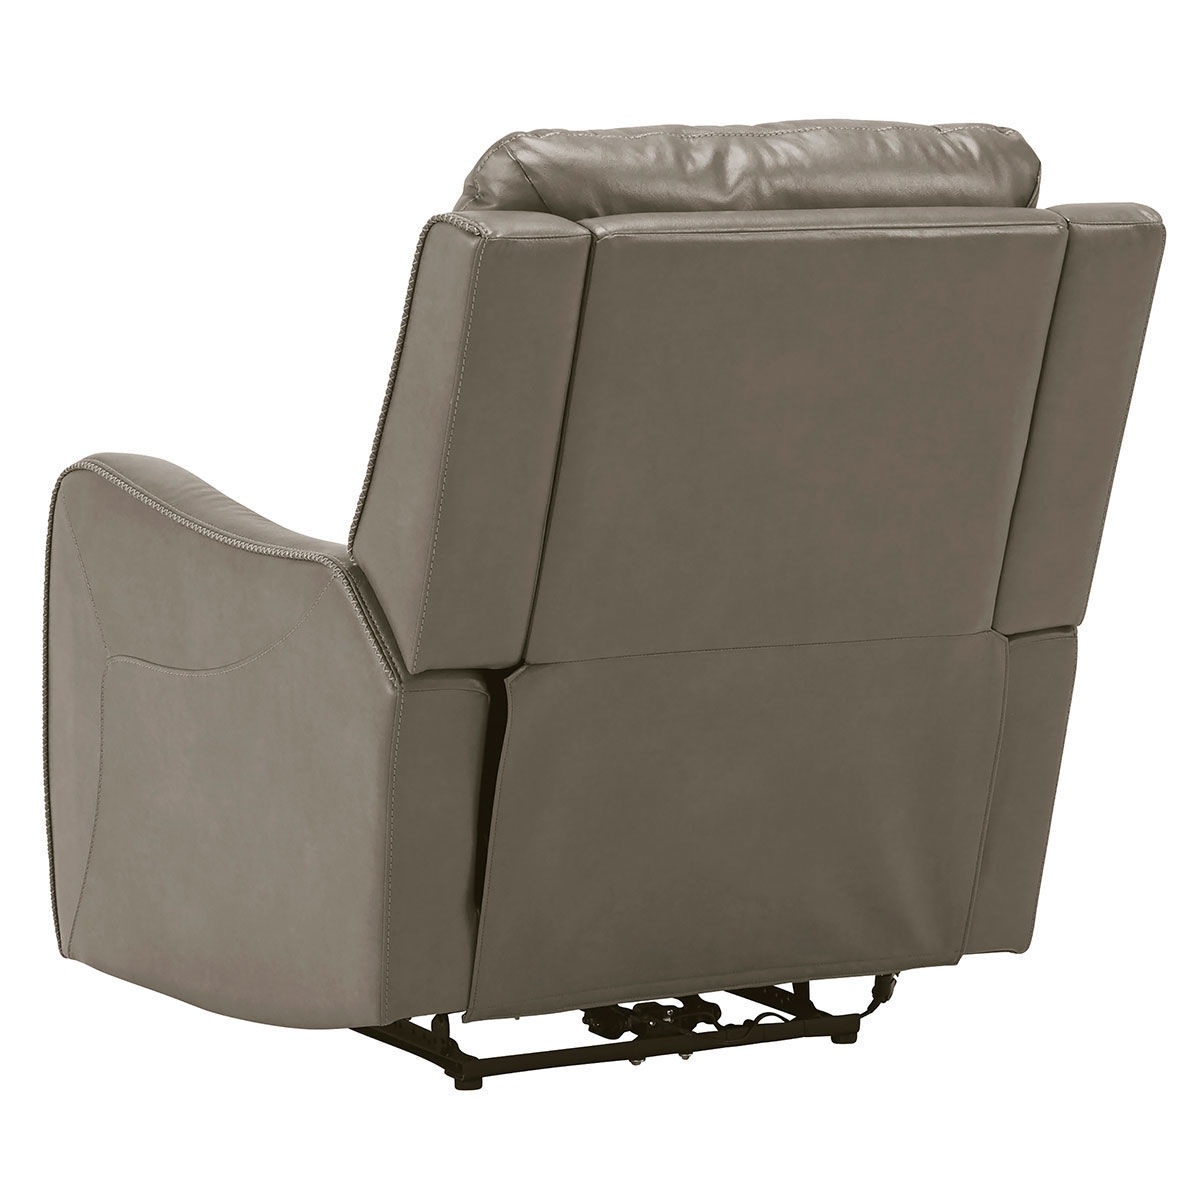 Picture of GRAND SAND WALL RECLINER  W/ POWER HEADREST & MASSAGE